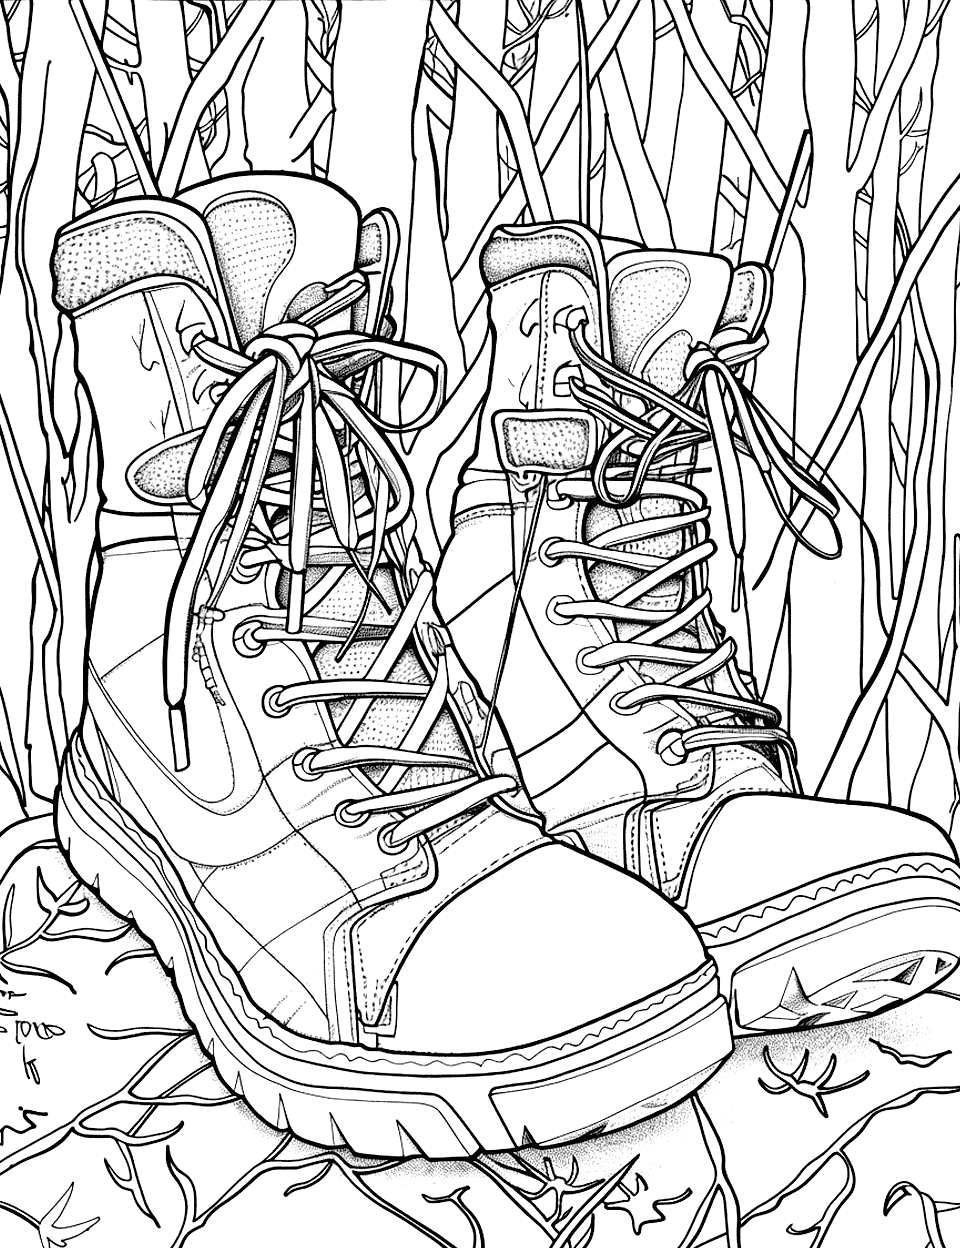 Boots in the Woods Shoe Coloring Page - Boots against a backdrop of dense trees in the woods.